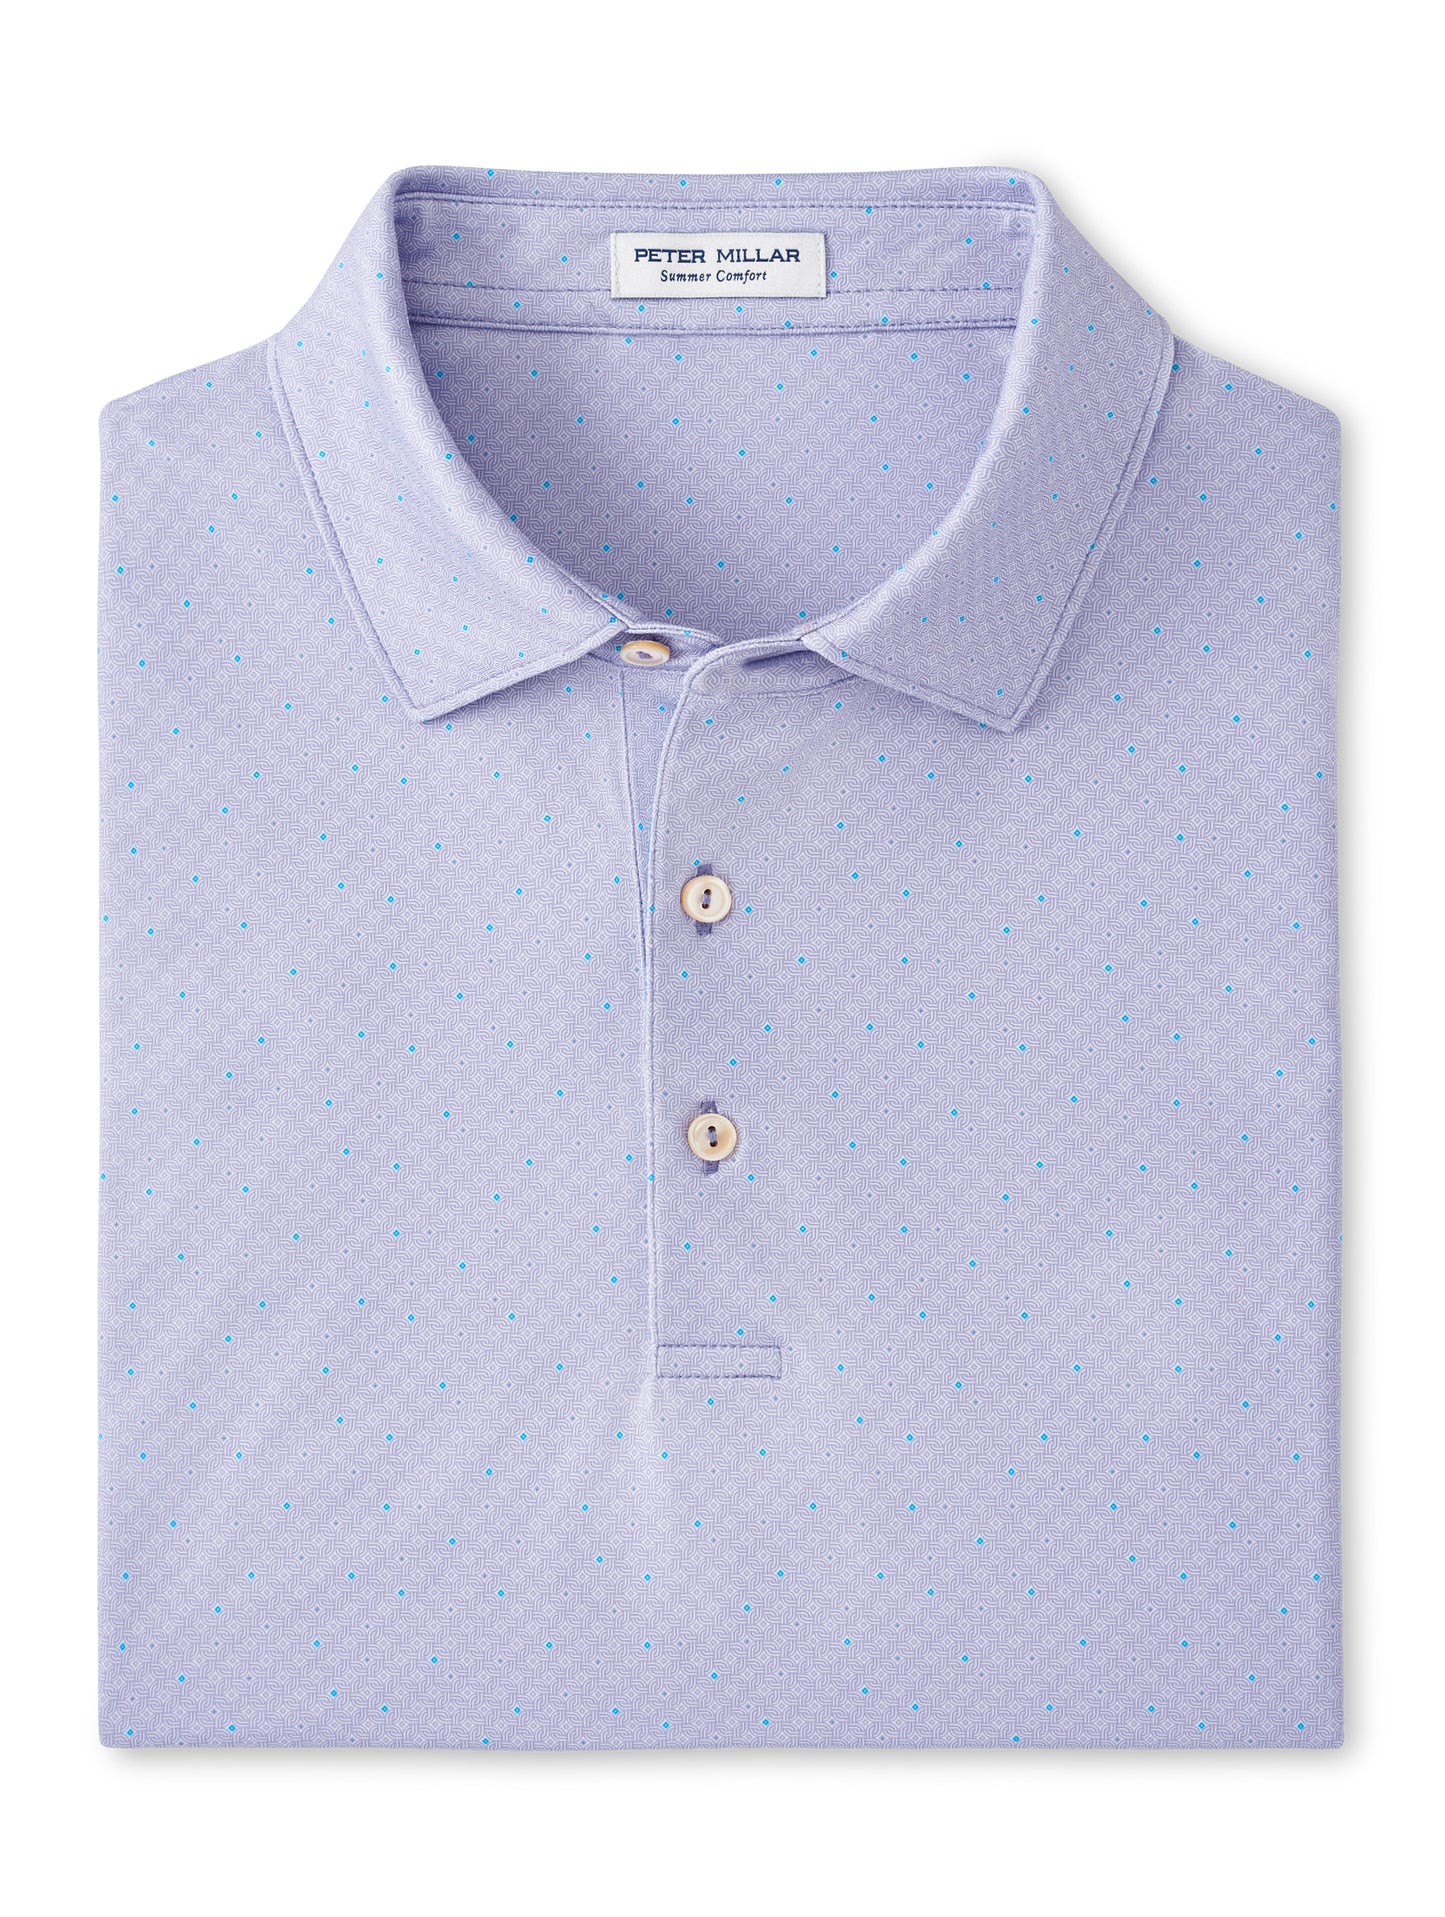 Peter Millar Soriano Performance Jersey Polo - Lavender Fog